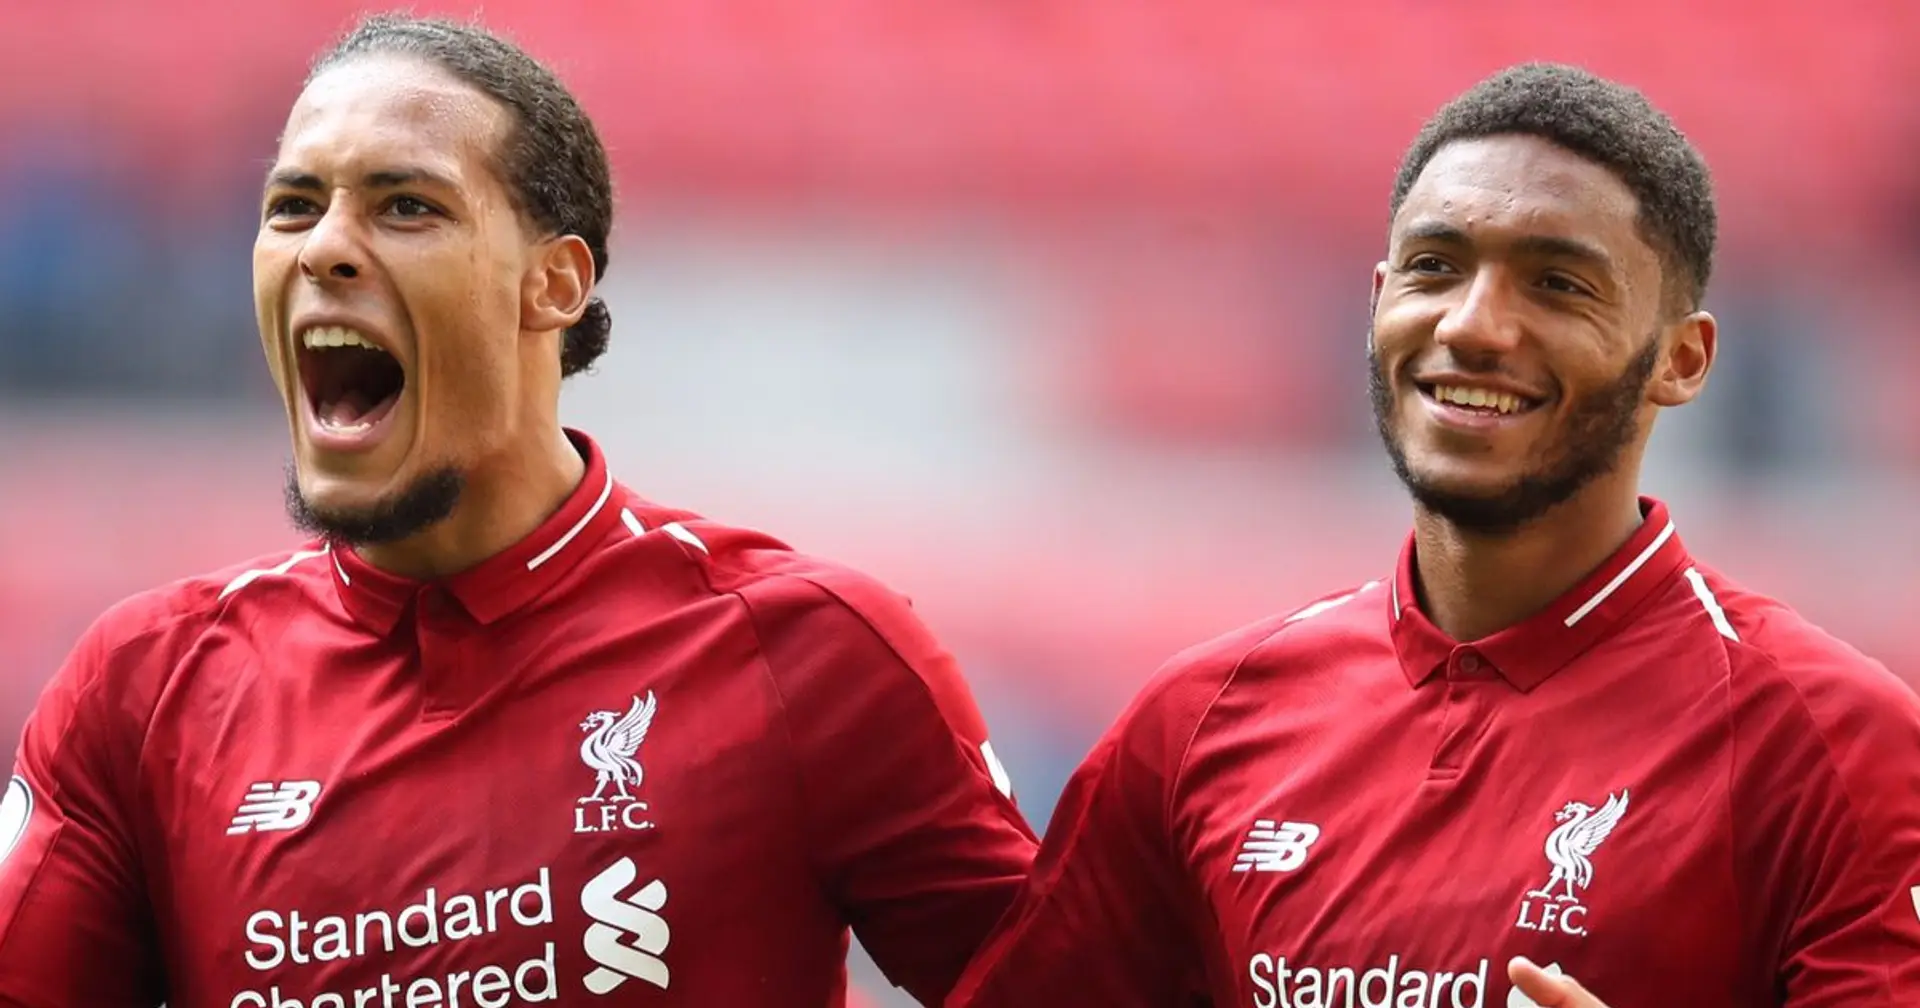 OFFICIAL: Van Dijk, Gomez included in Liverpool matchday squad for Hertha clash